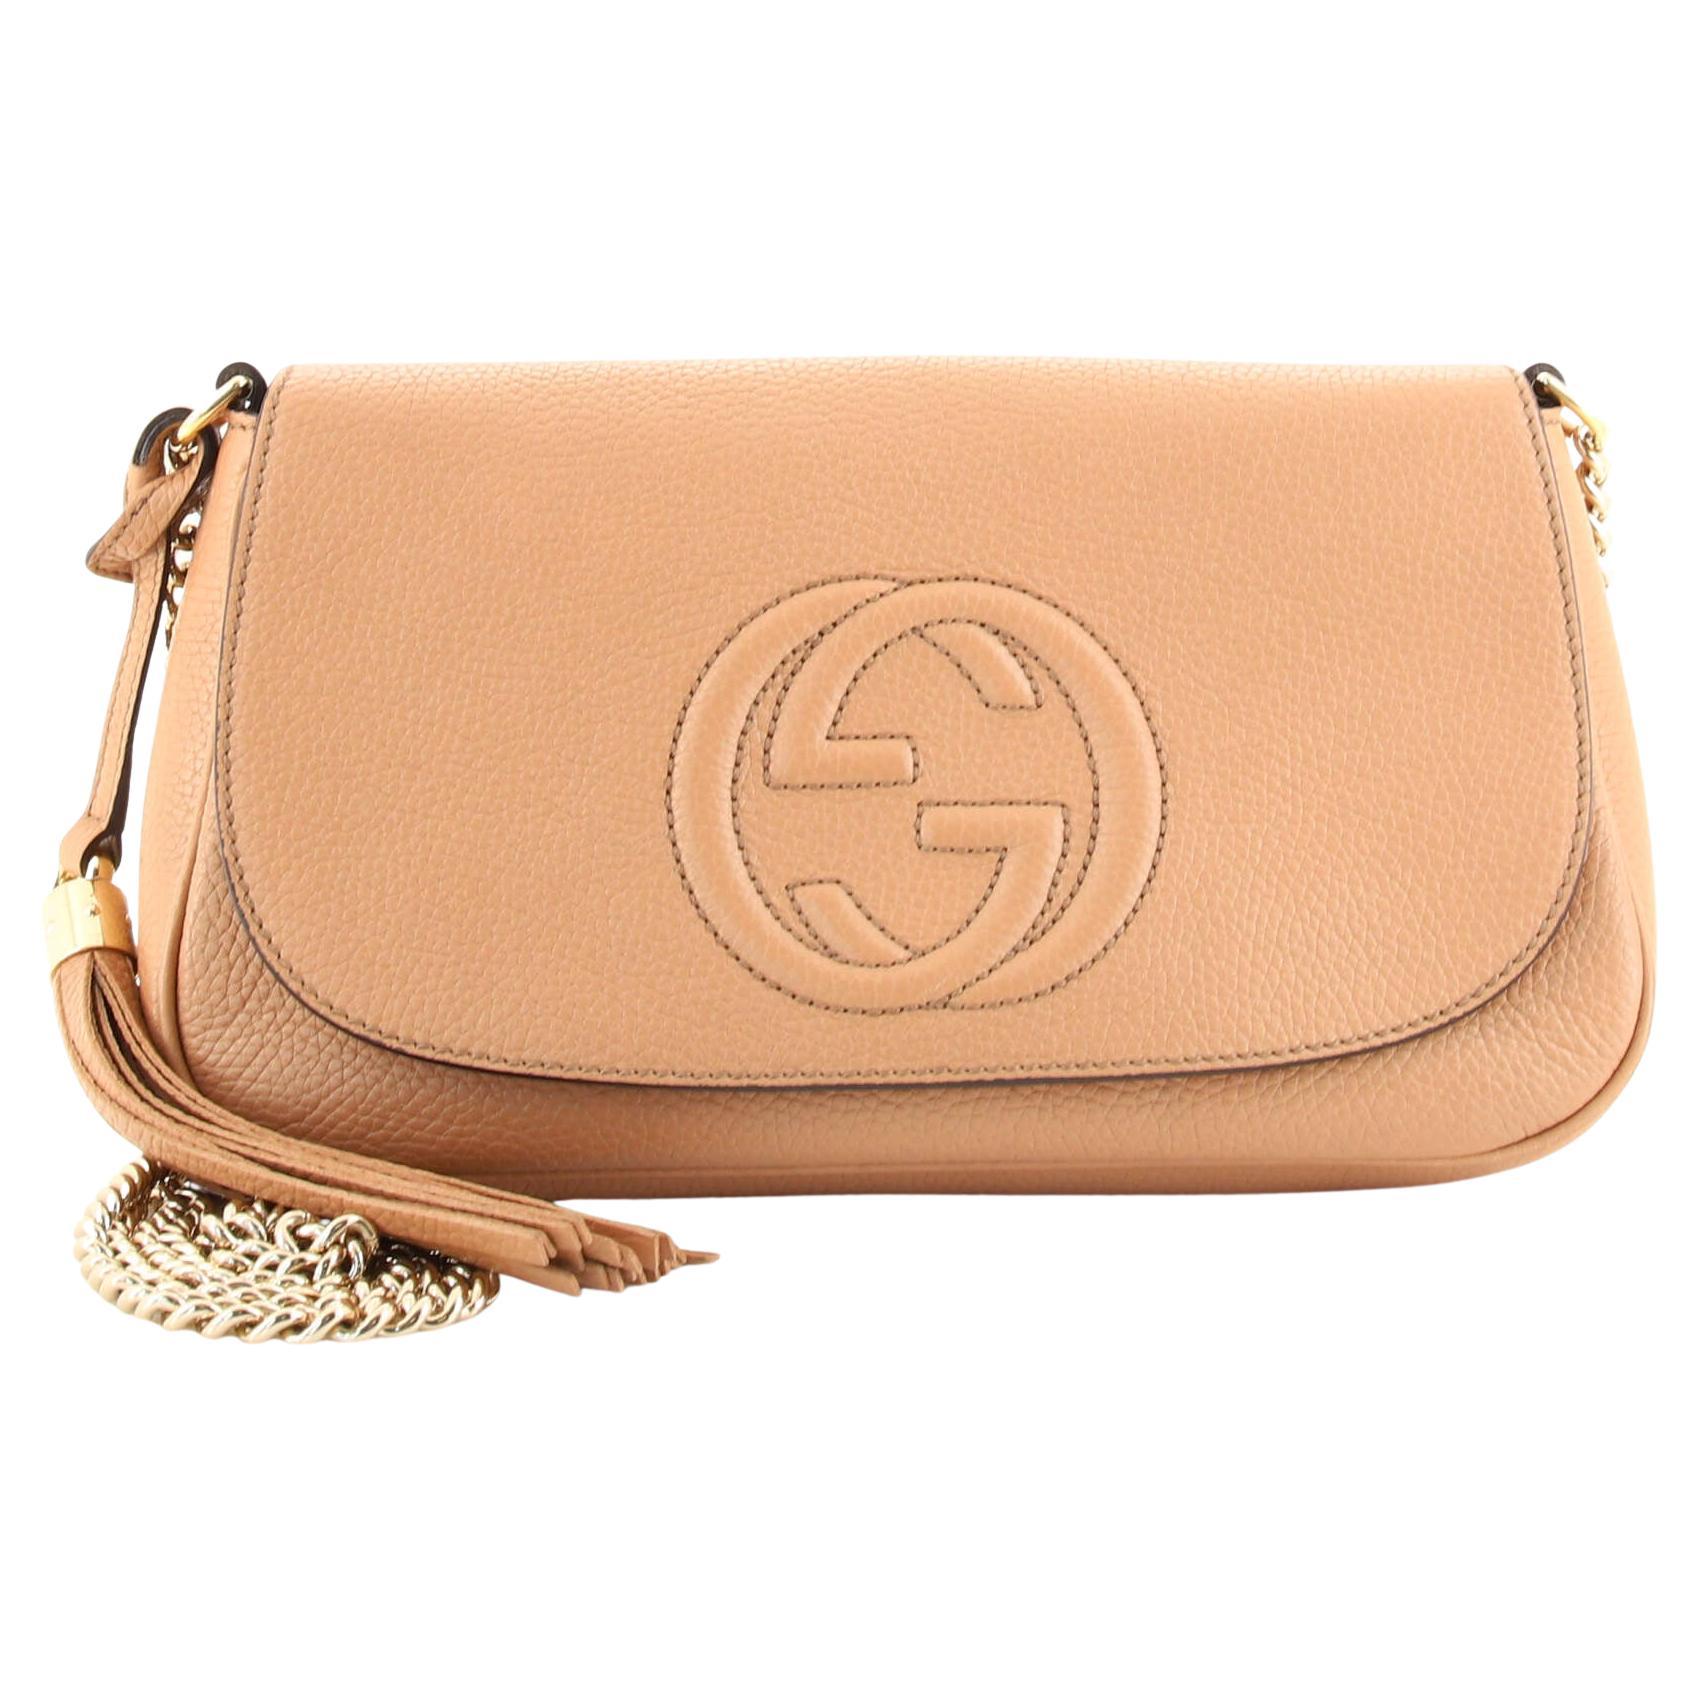 Shop GUCCI Unisex Street Style Crossbody Bag Logo Outlet by